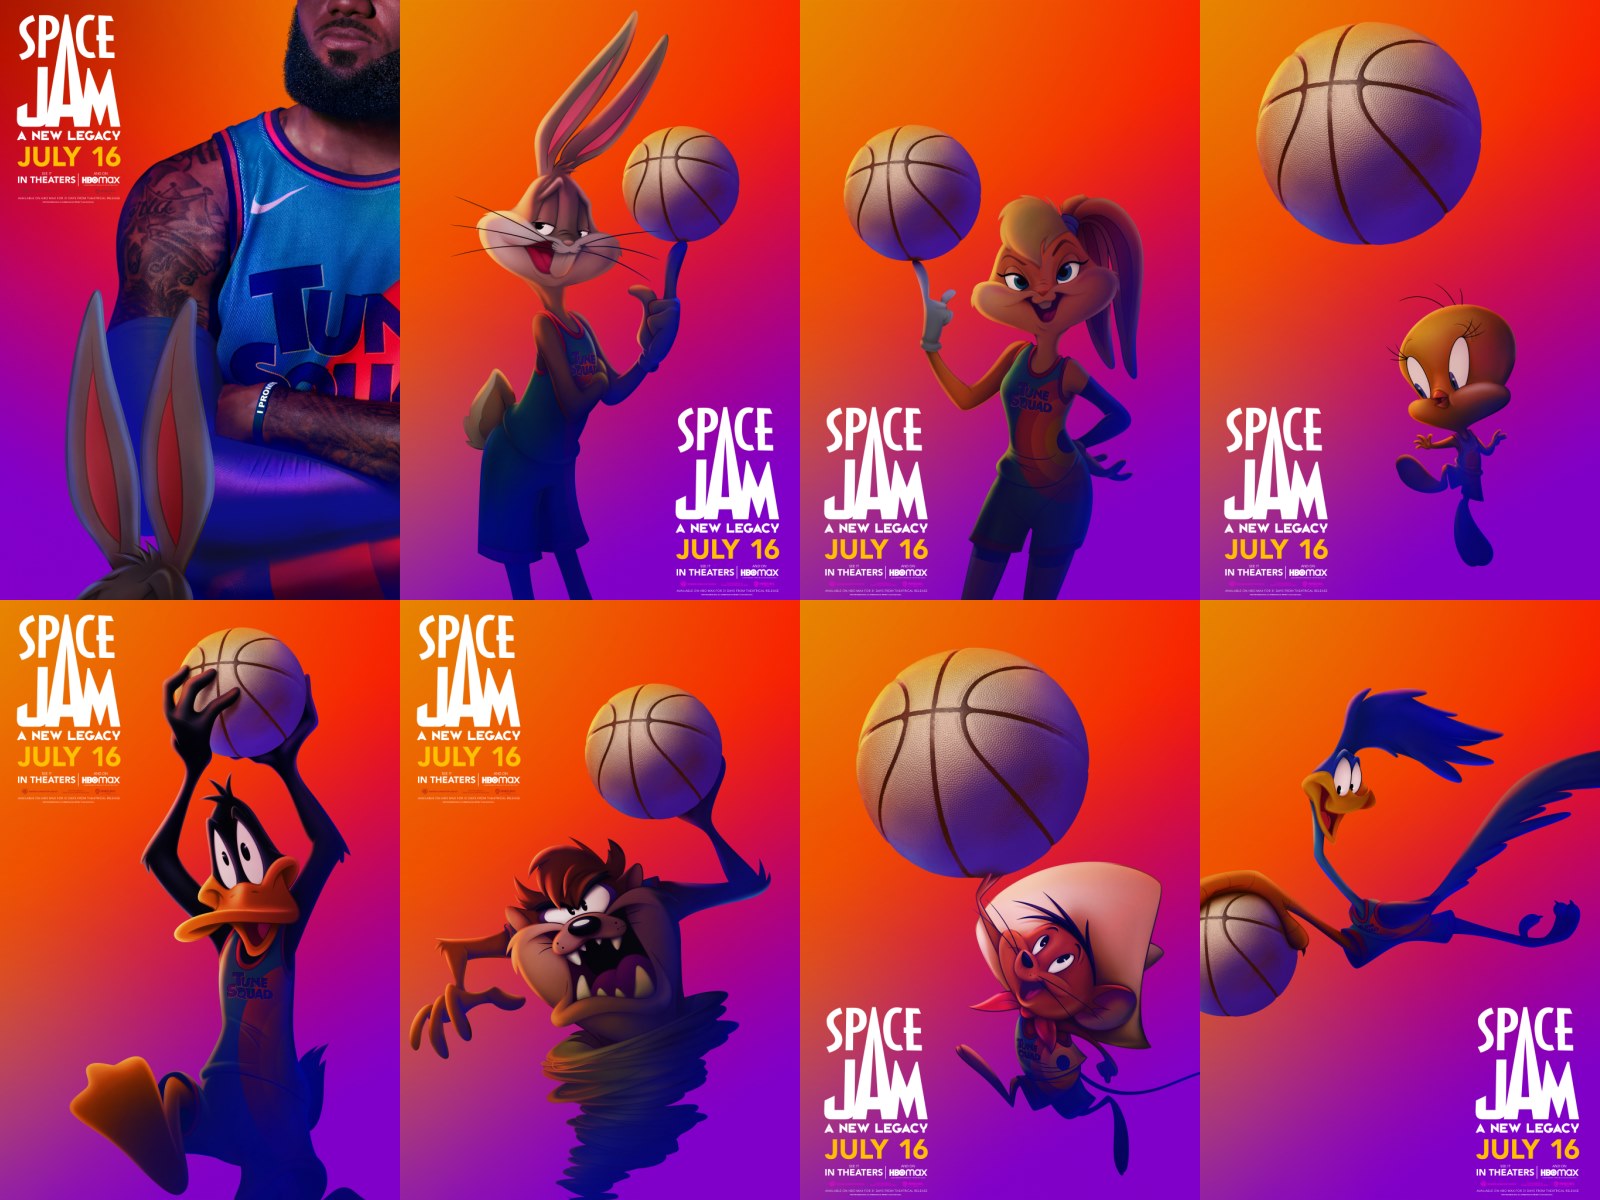 Meet The Fun Cast Of Space Jam 2 All Background Characters And Their Unique Personalities 